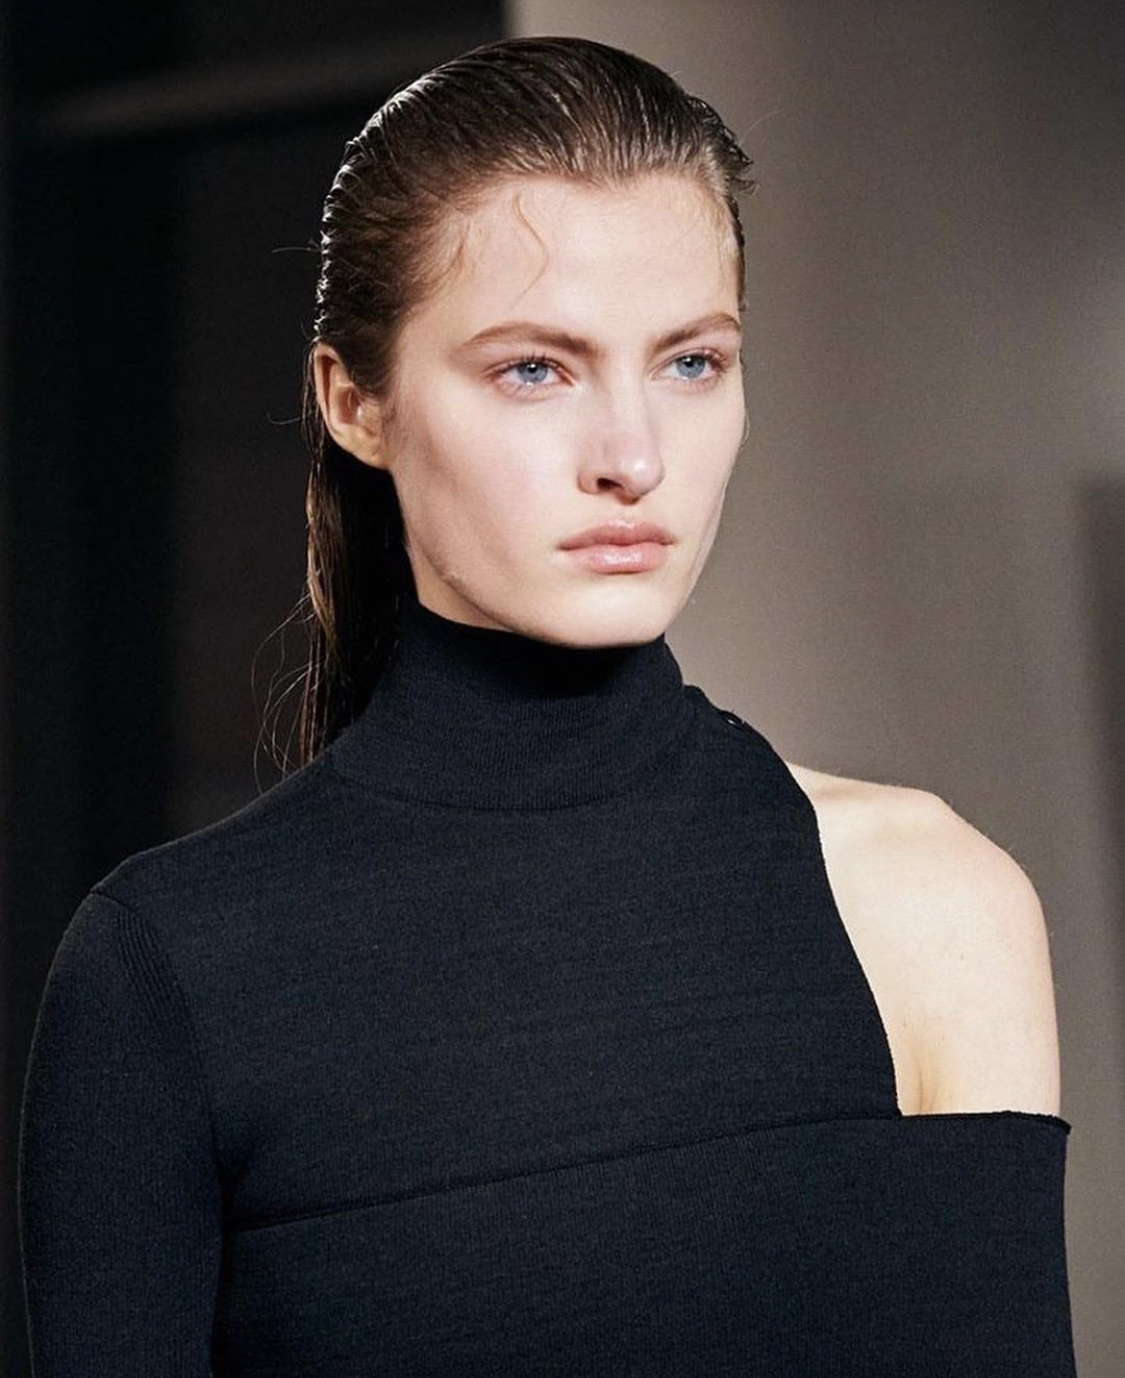 NYFW: HAIR HIGHLIGHTS FROM THE FW20 RUNWAYS - THE JOURNAL MAG